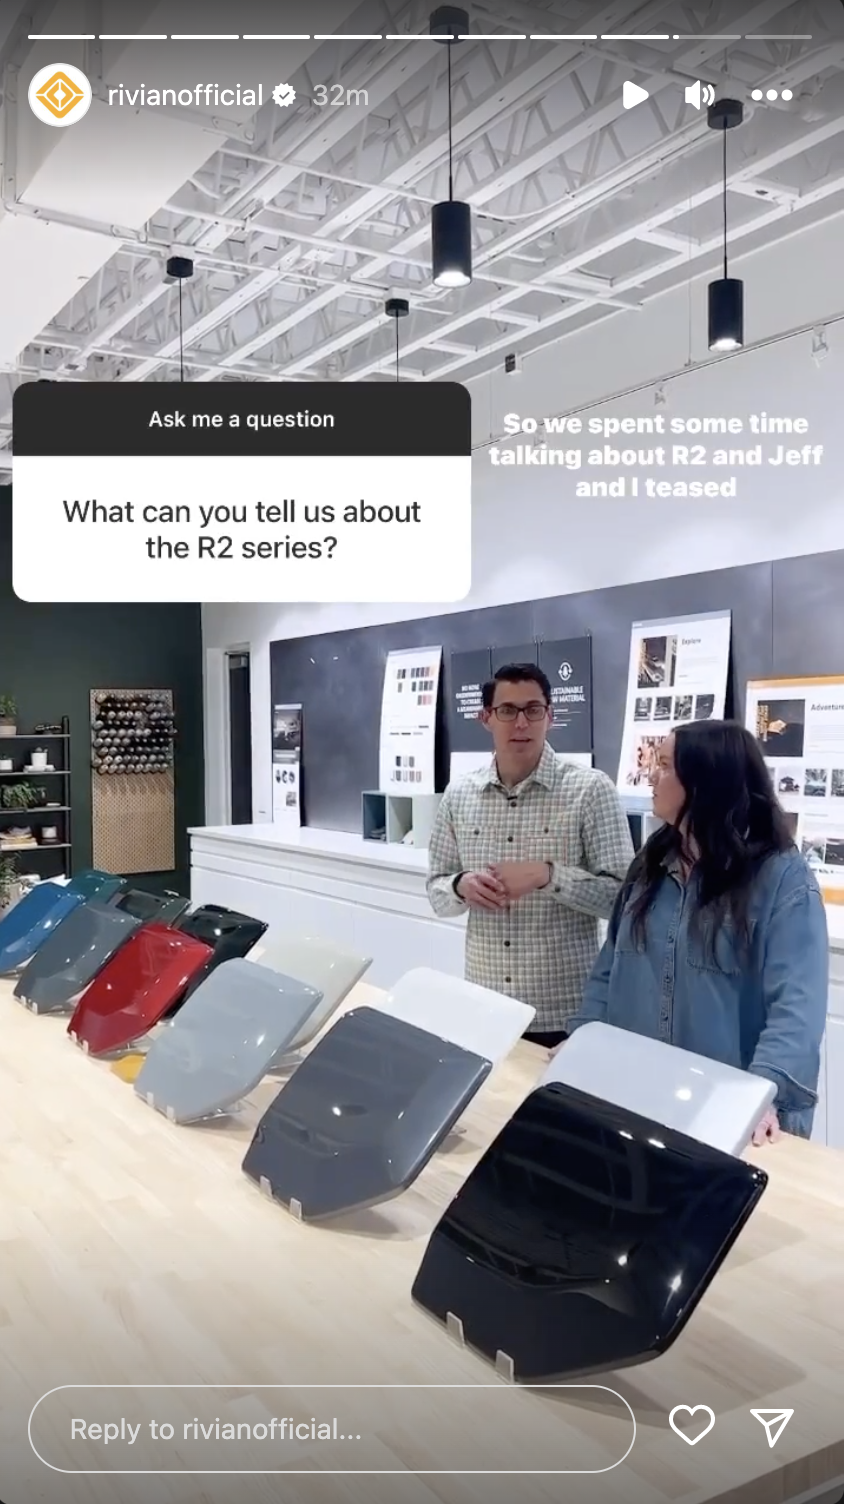 Rivian R1T R1S Potential new exterior | interior colors - Evergreen, Slate, Sand, Turquoise | Sand, Brick Screenshot 2023-05-26 at 10.41.57 AM